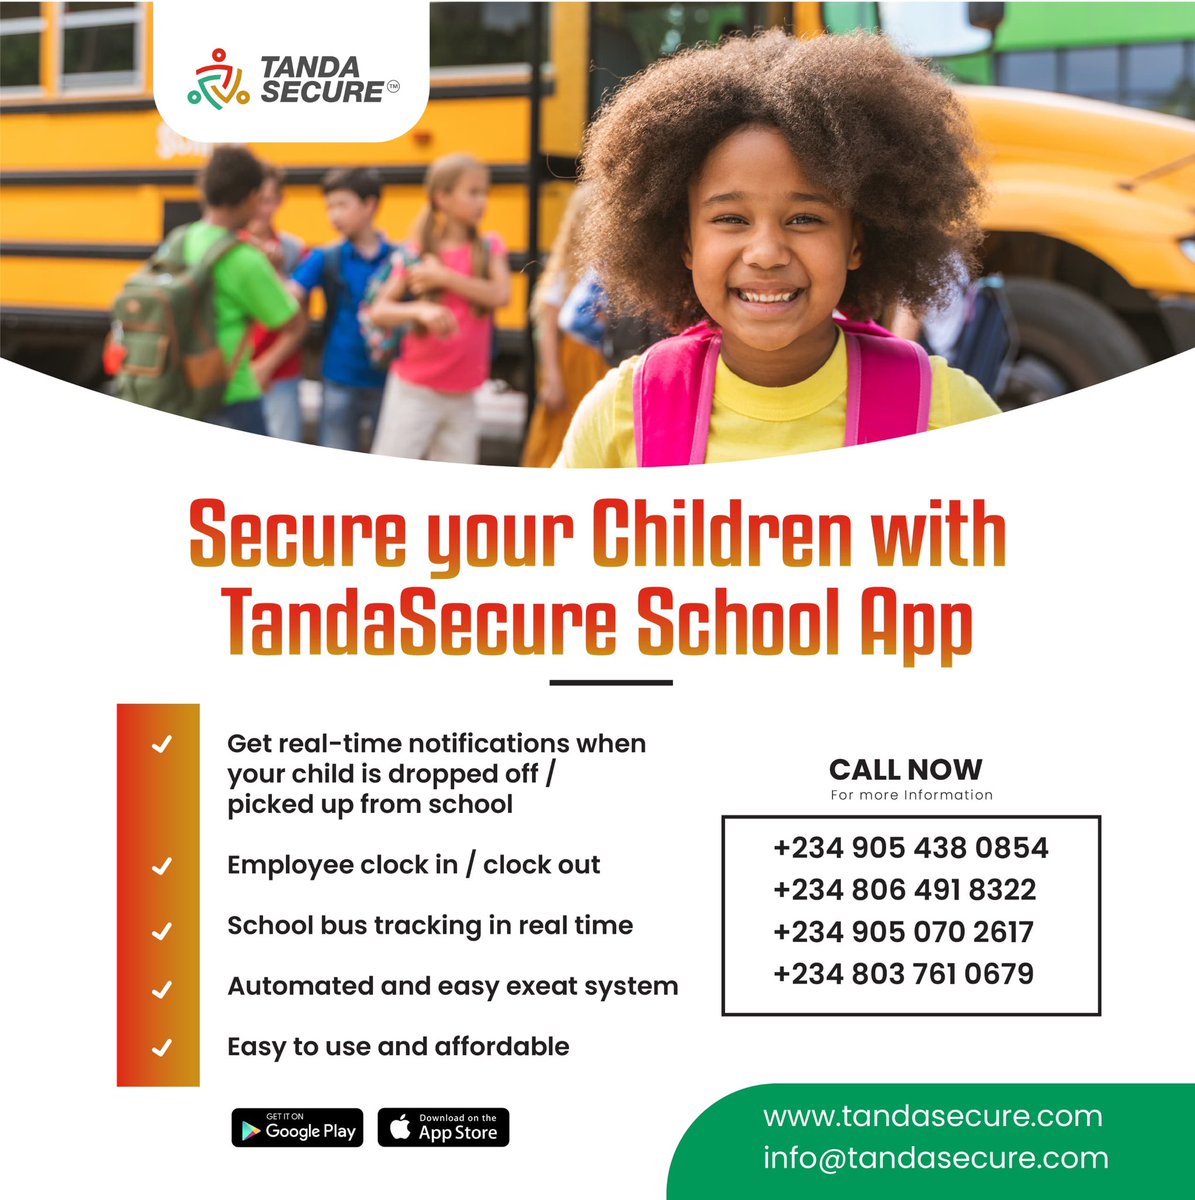 With TANDA SECURE, peace of mind is just a tap away.

This is a value packed bargain you can’t afford to miss. 

For more information, visit tandasecure.com. 

.
.
.

#childsafety #childsafetyawareness #childsafetyplatform #tandasecure